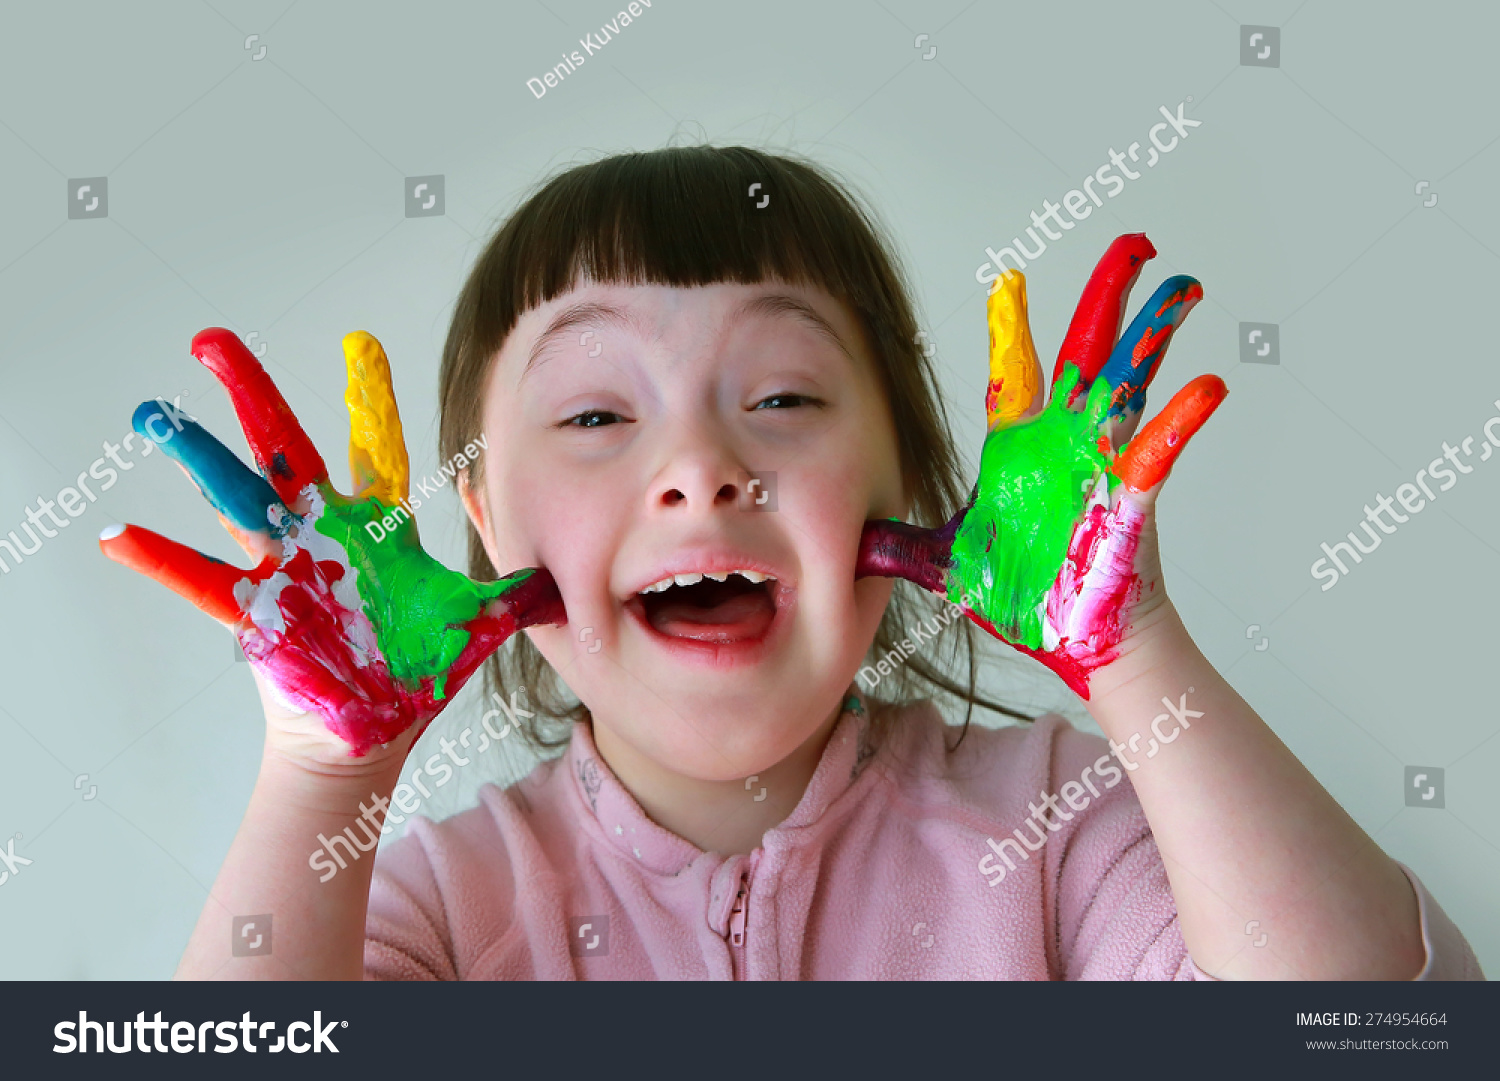 Cute little girl with painted hands. Isolated on grey background. #274954664